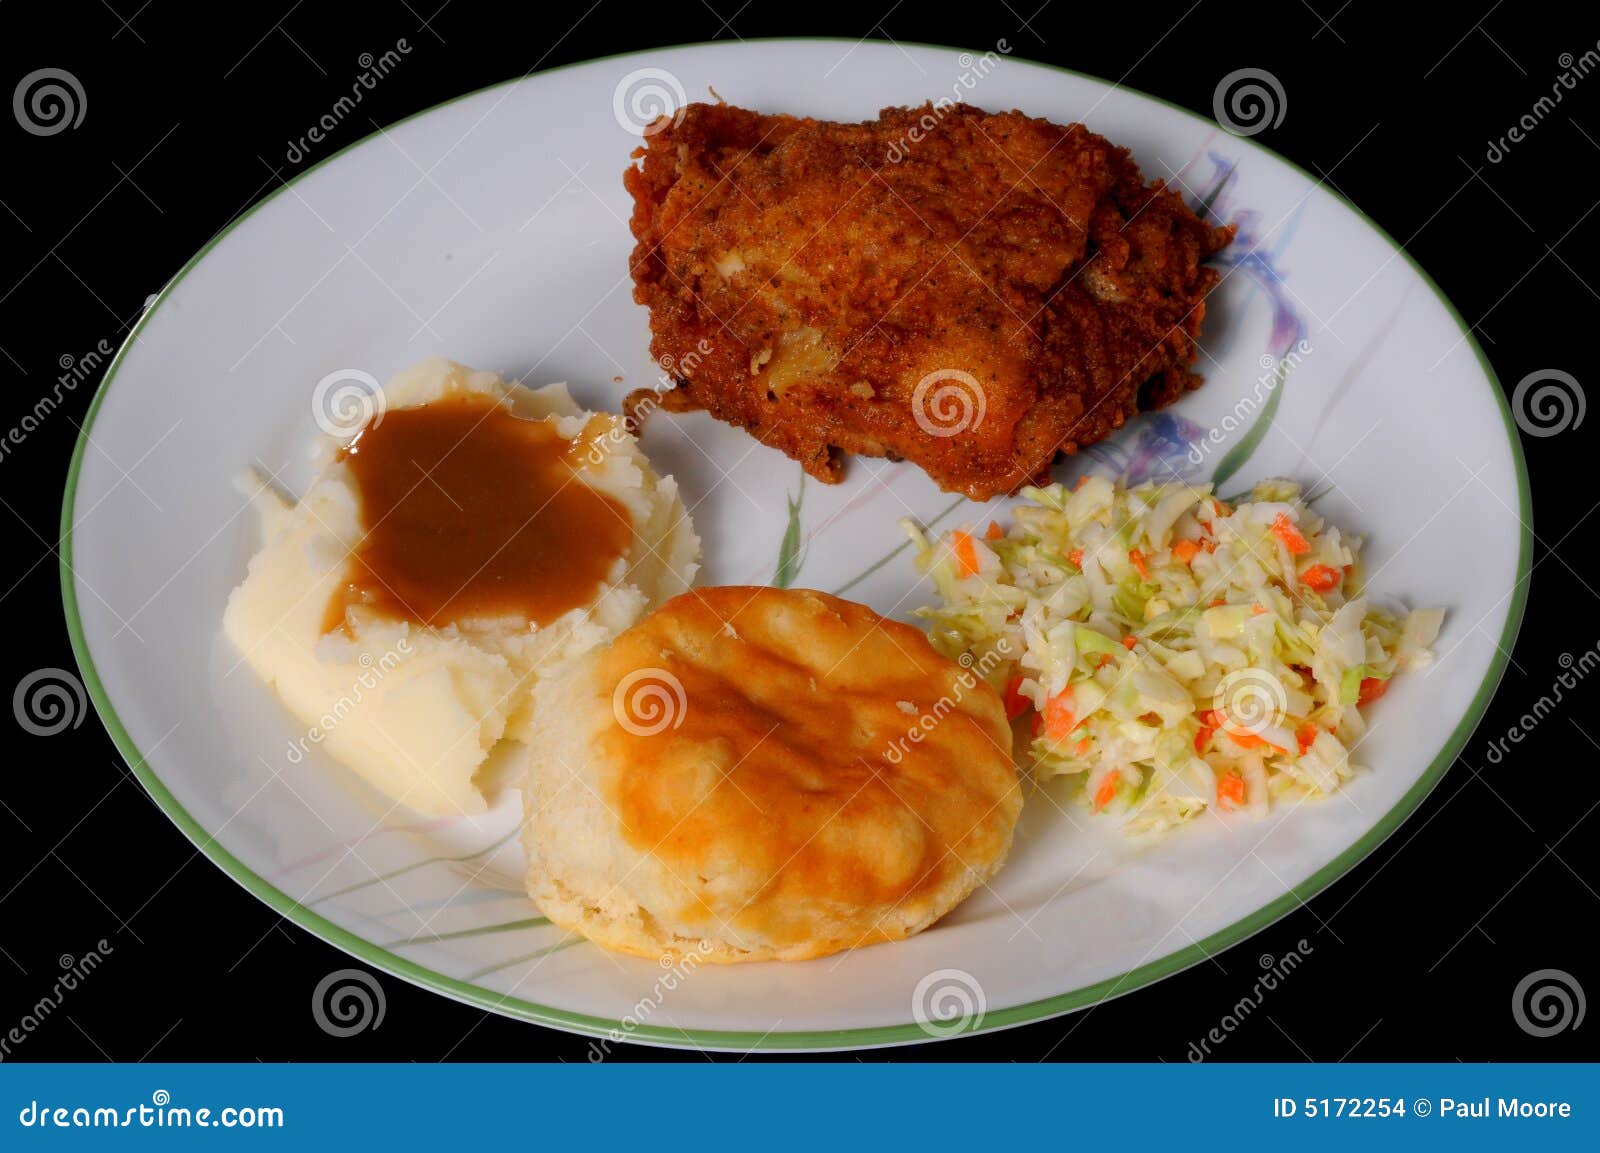 Fried Chicken And Mashed Potatoes Stock Images - Image: 5172254